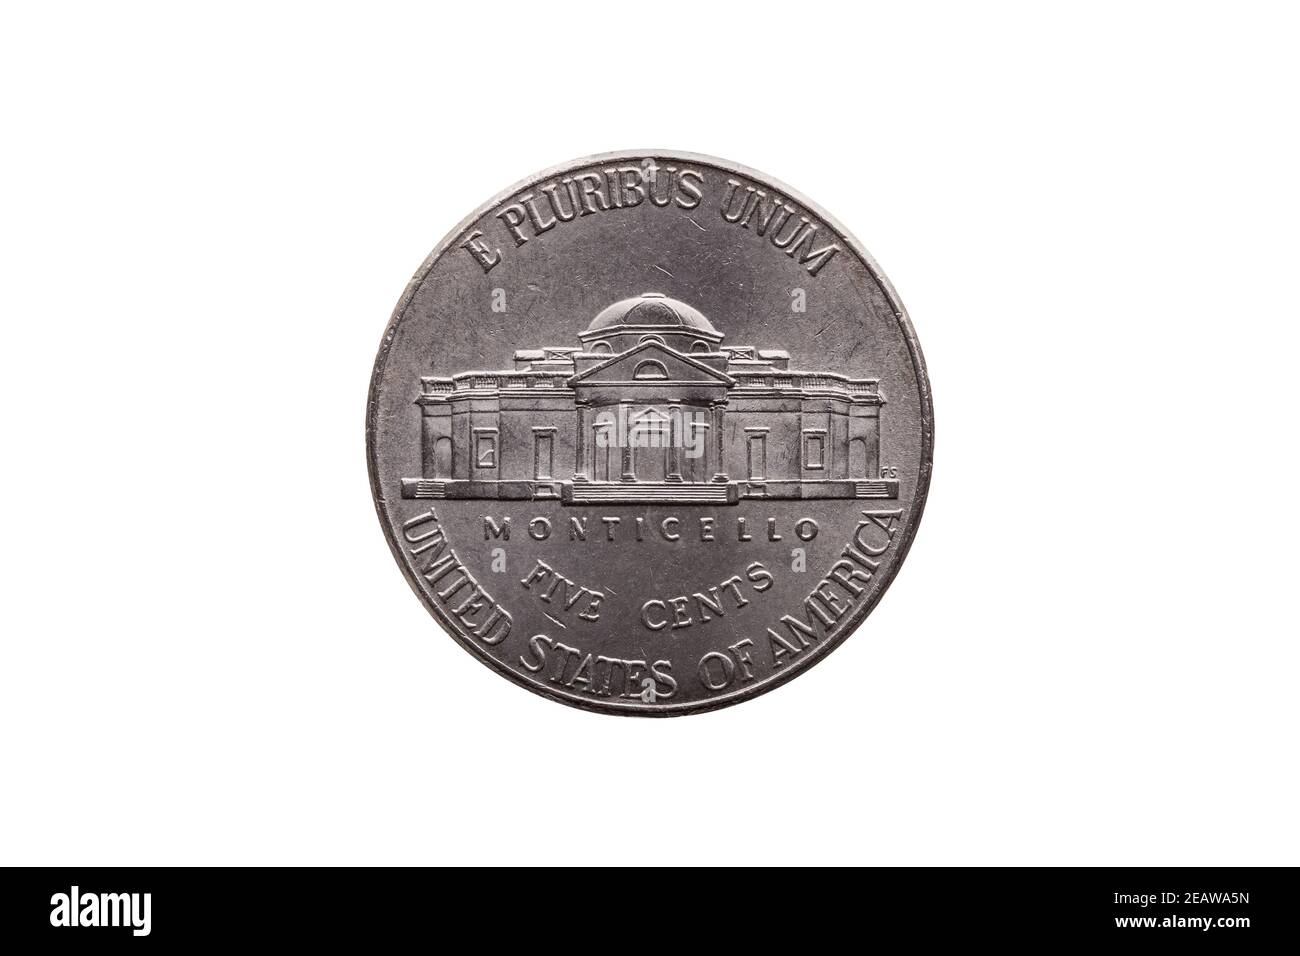 USA half dime nickel coin (25 cents) reverse showing Monticello cut out and isolated Stock Photo